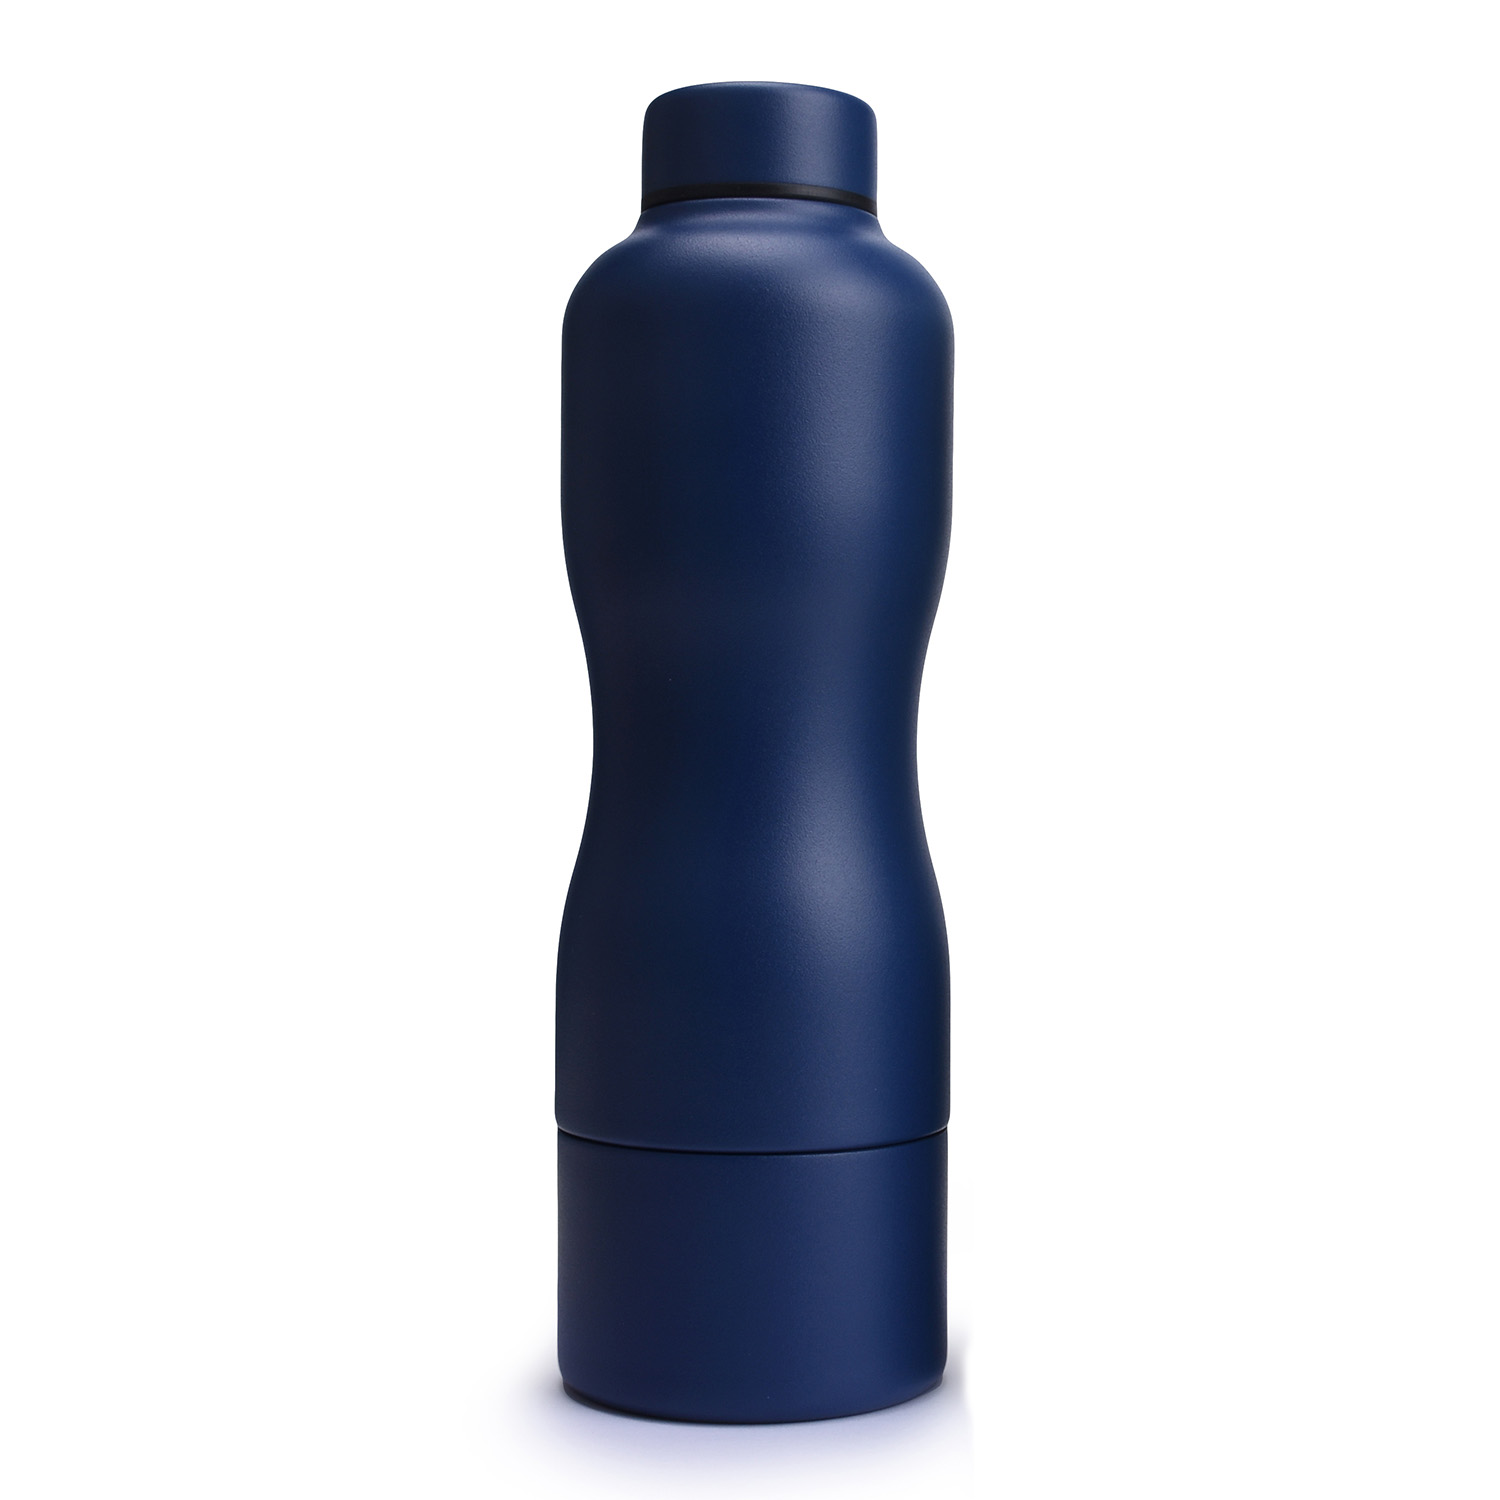 CR Water Bottles In 21 And 24 Ounce Size